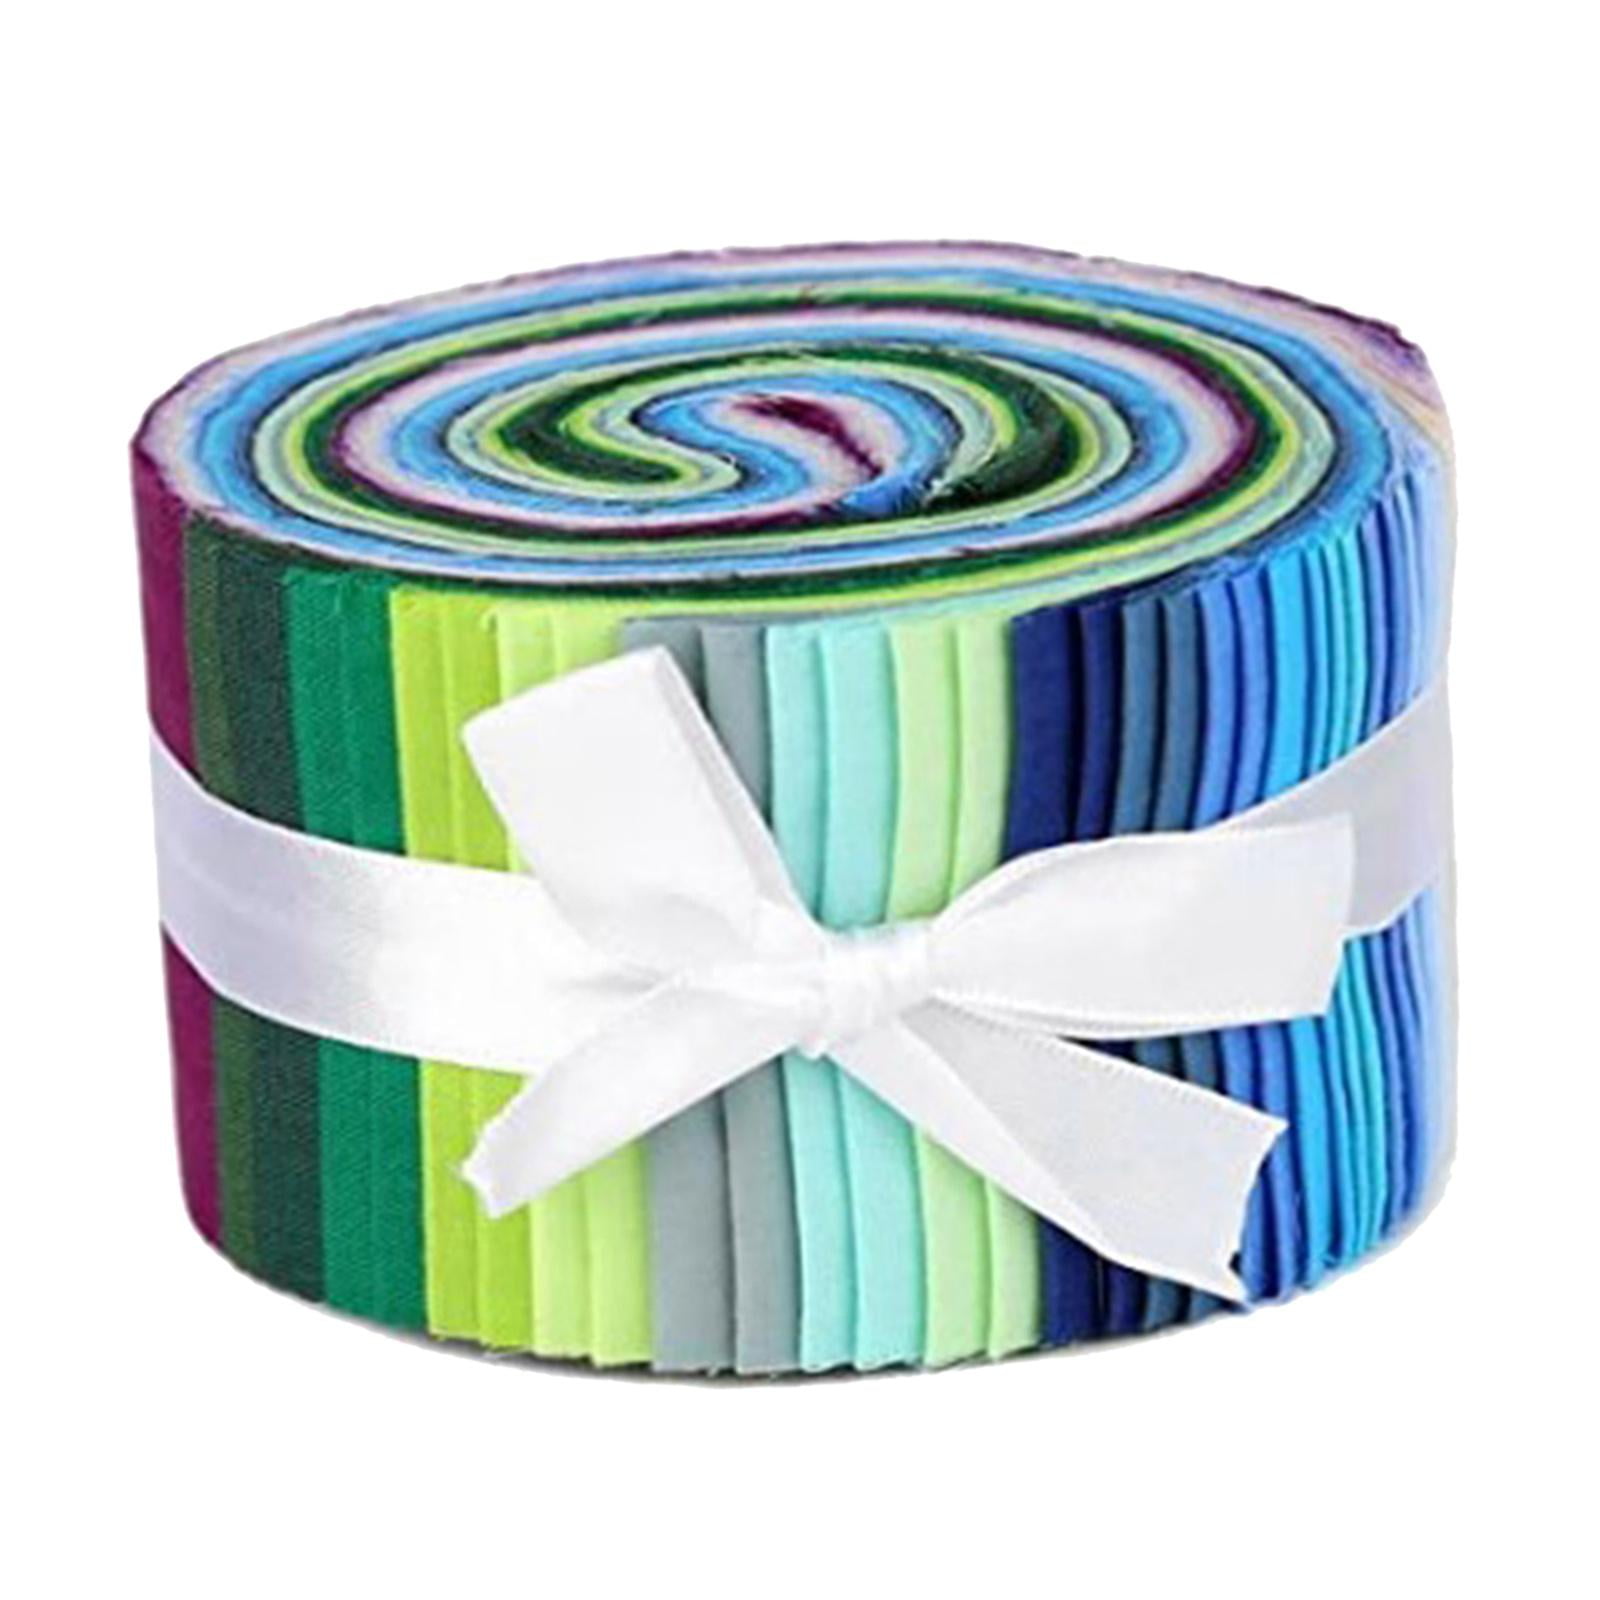 2.5 inch Fizzy pop Jelly Roll 100% cotton fabric quilting 17 strips 